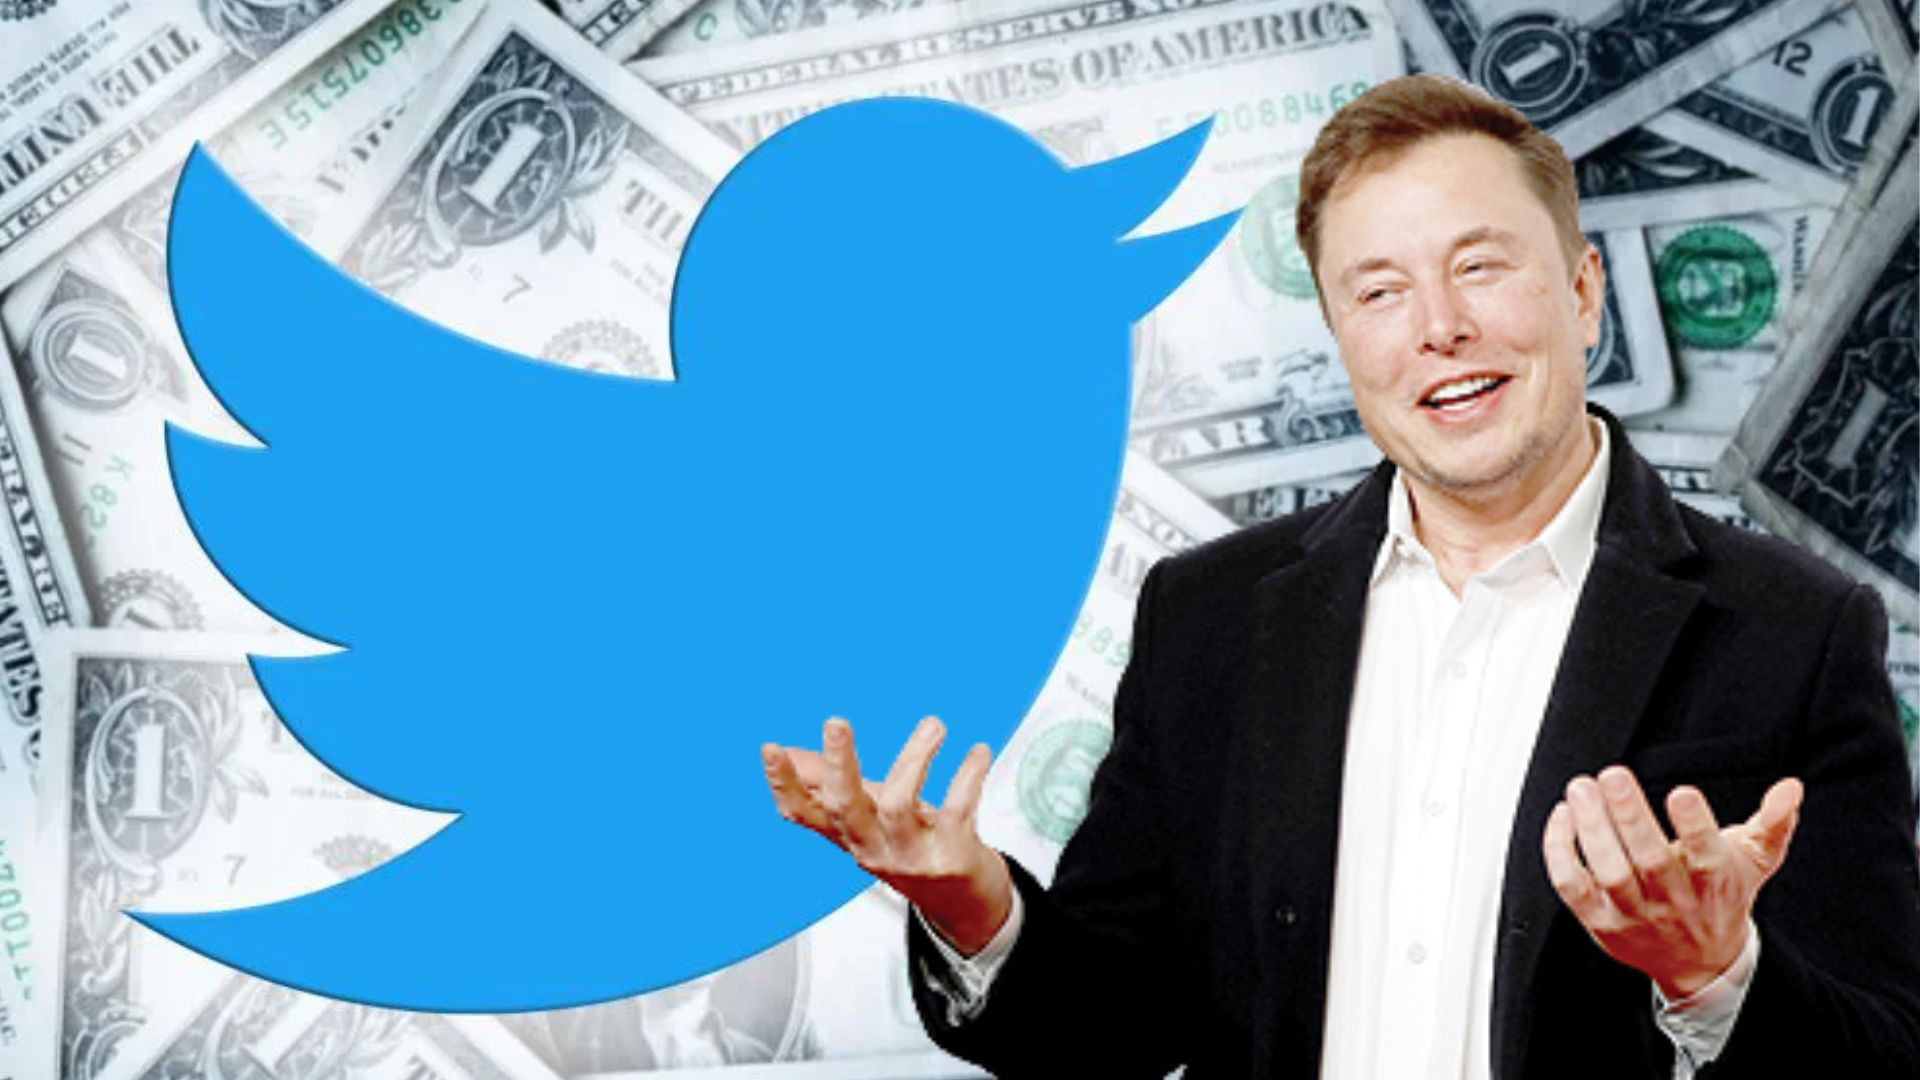 Entrepreneur Elon Musk is looking for different ways of financing to make Twitter profitable.